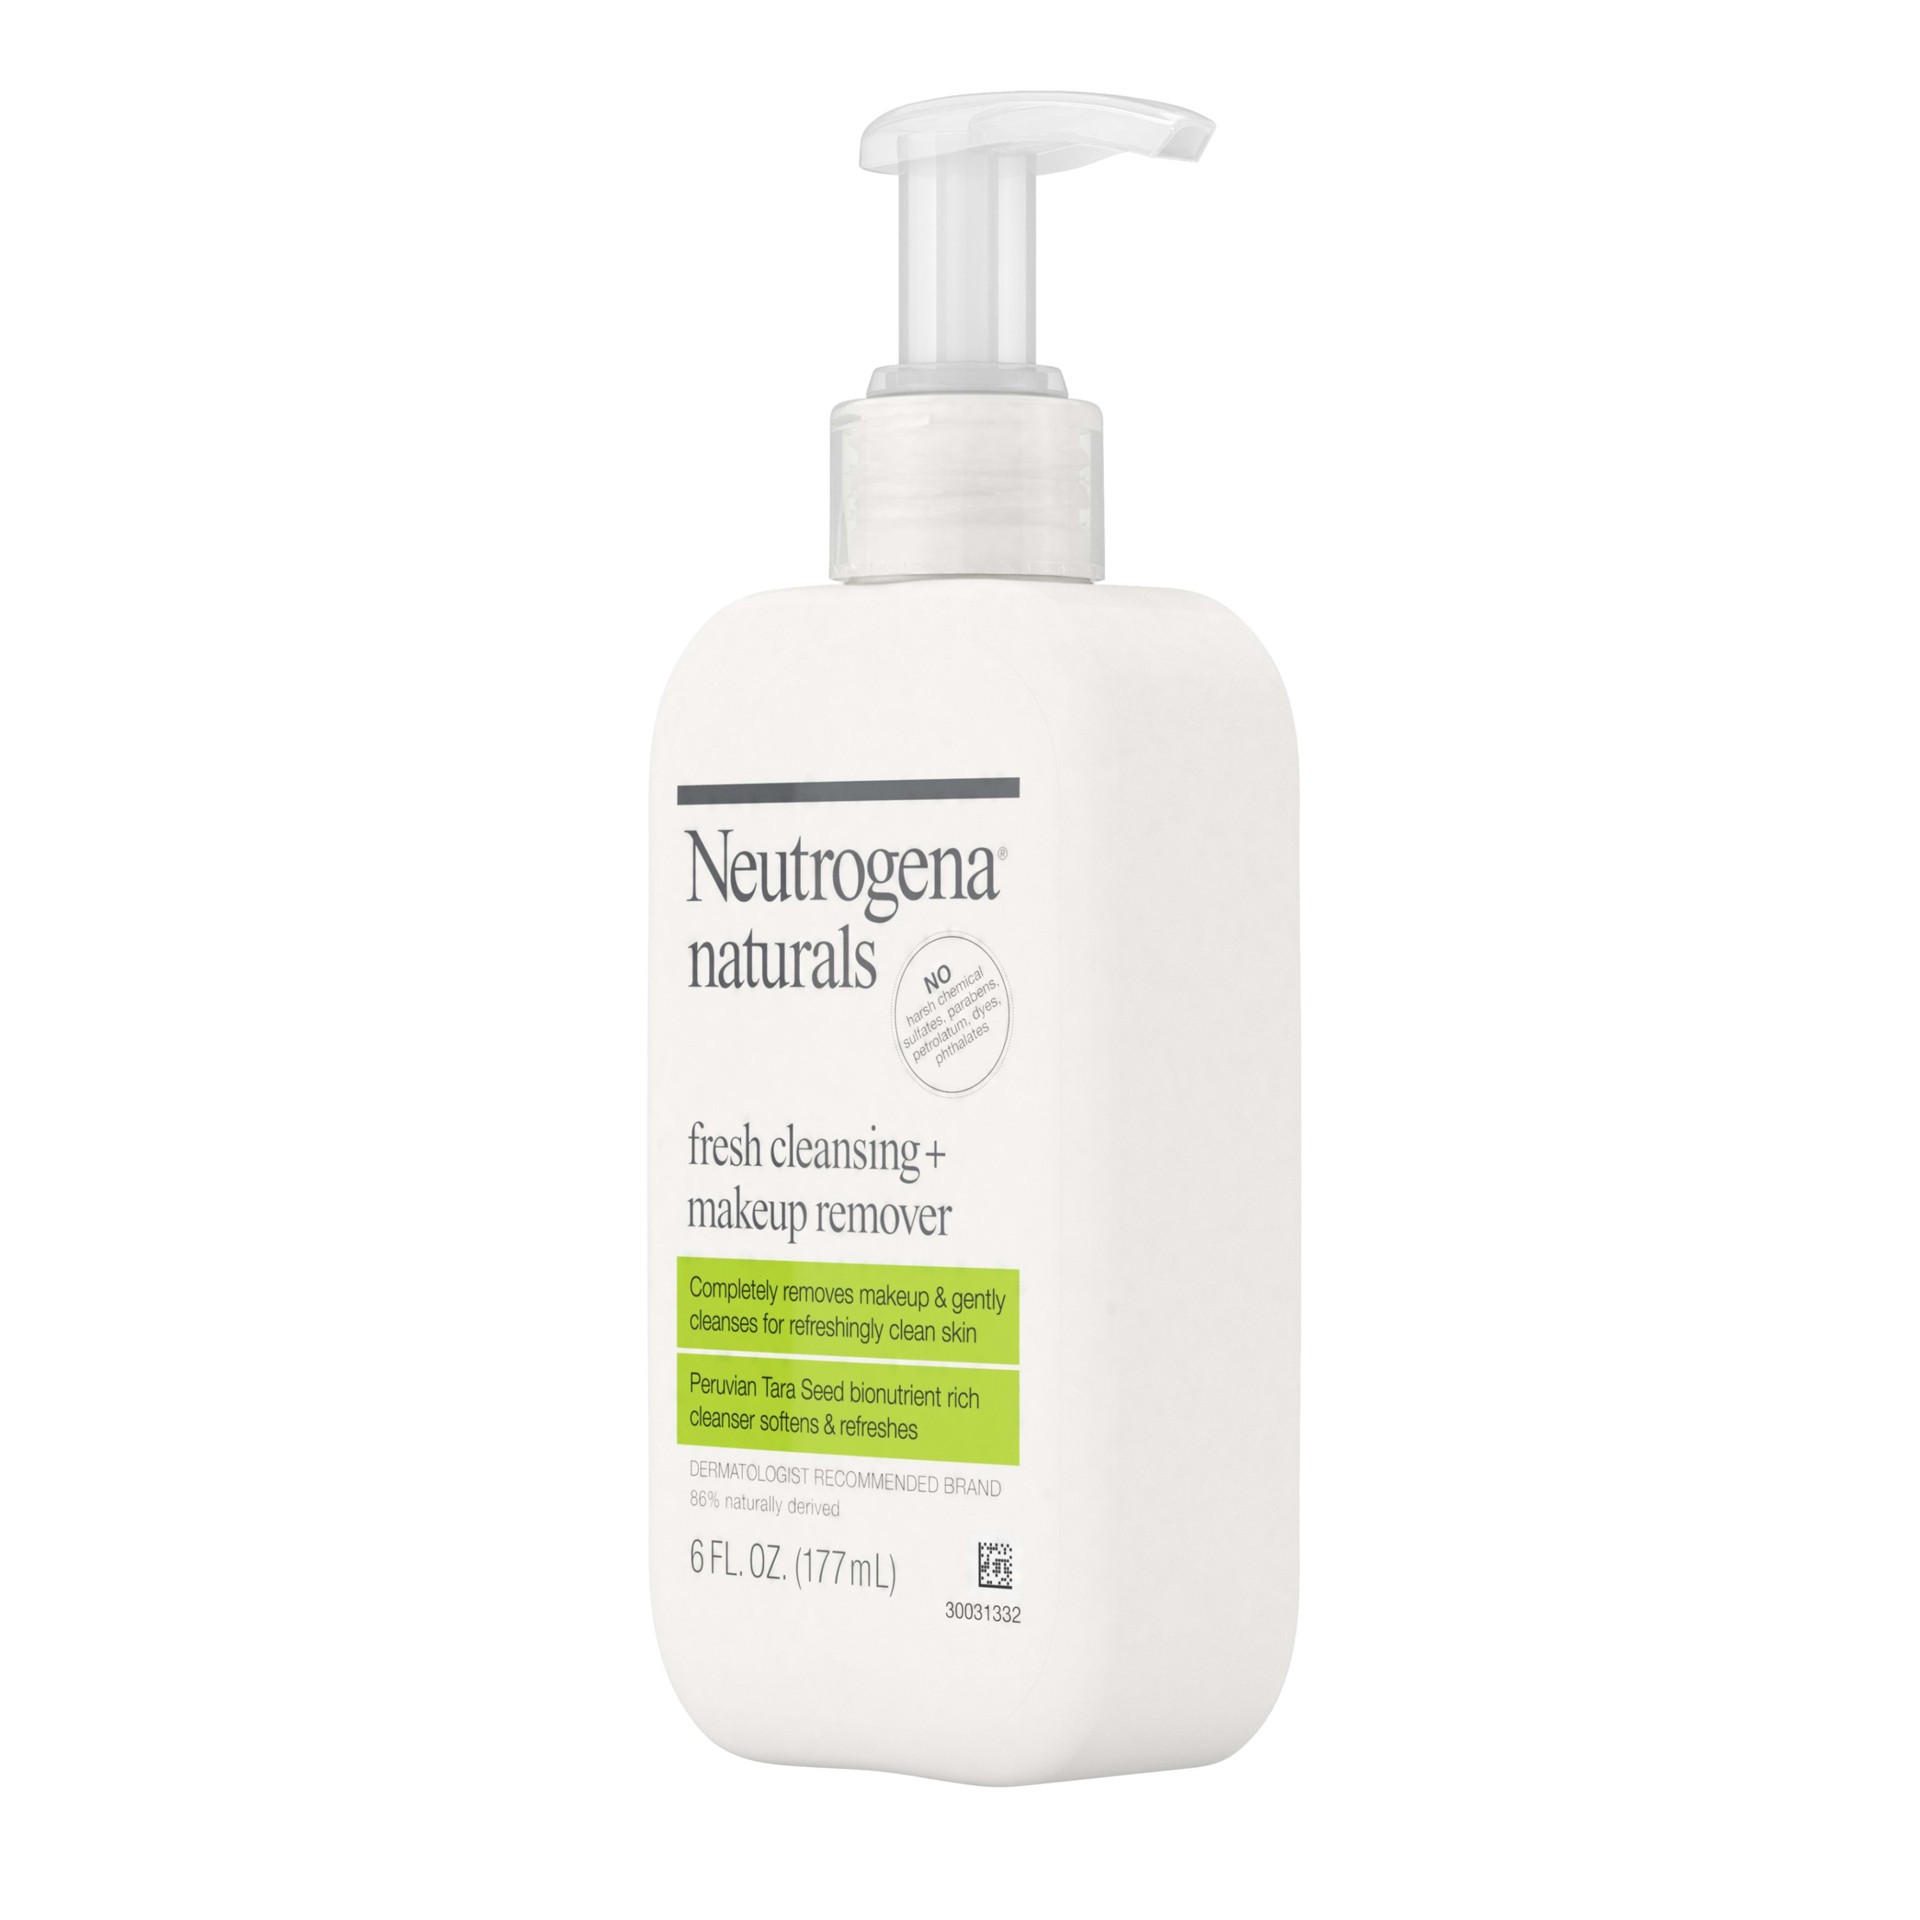 slide 4 of 5, Neutrogena Naturals Fresh Cleansing Daily Face Wash + Makeup Remover with Naturally-Derived Peruvian Tara Seed, Hypoallergenic, Non-Comedogenic & Sulfate-, Paraben- & Phthalate-Free, 6 fl. oz, 6 fl oz